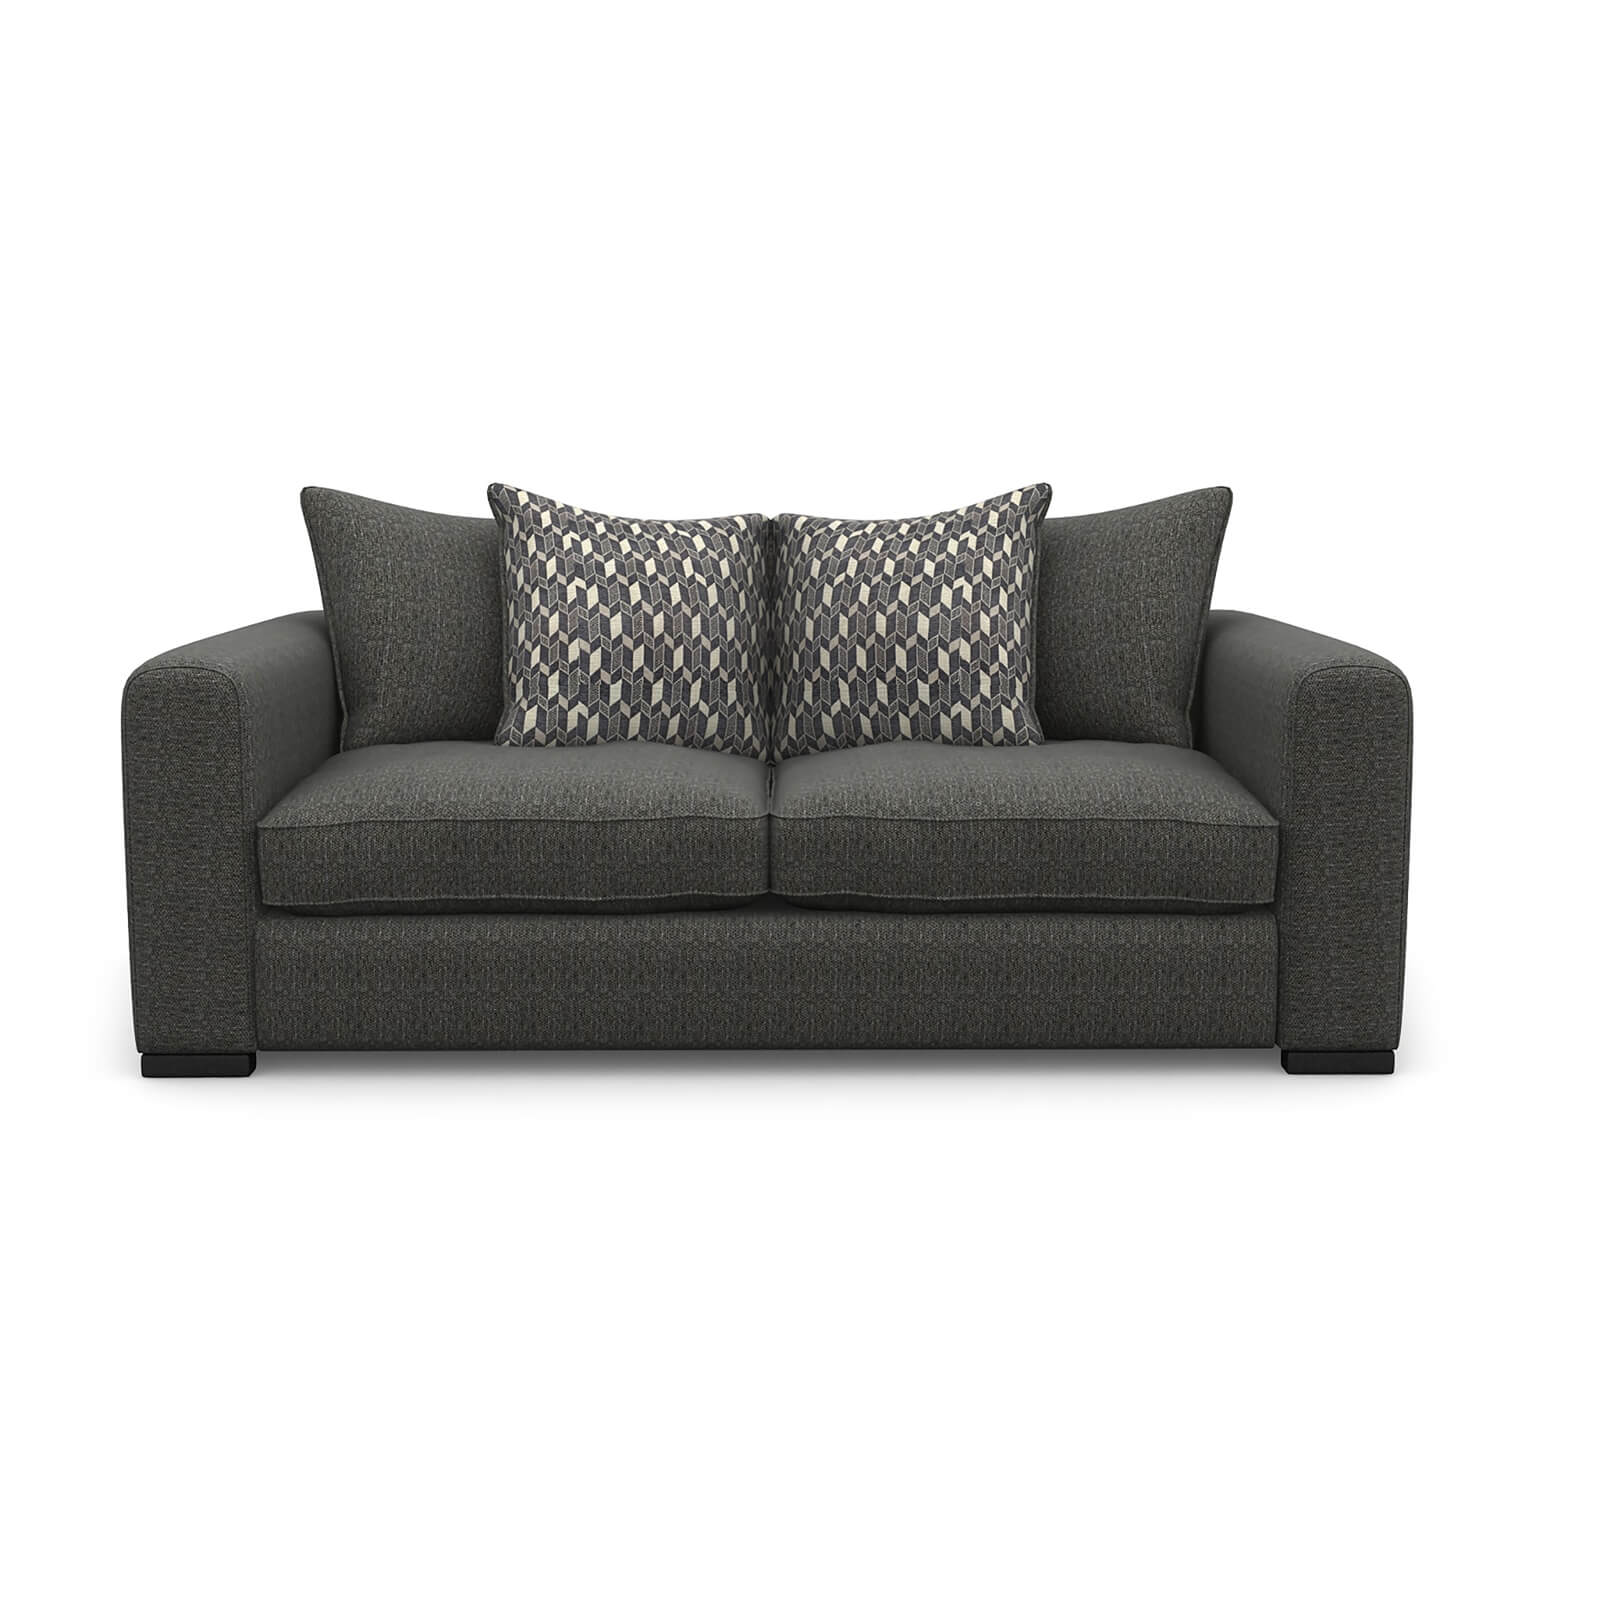 Lewis 2 Seater Sofa - Charcoal